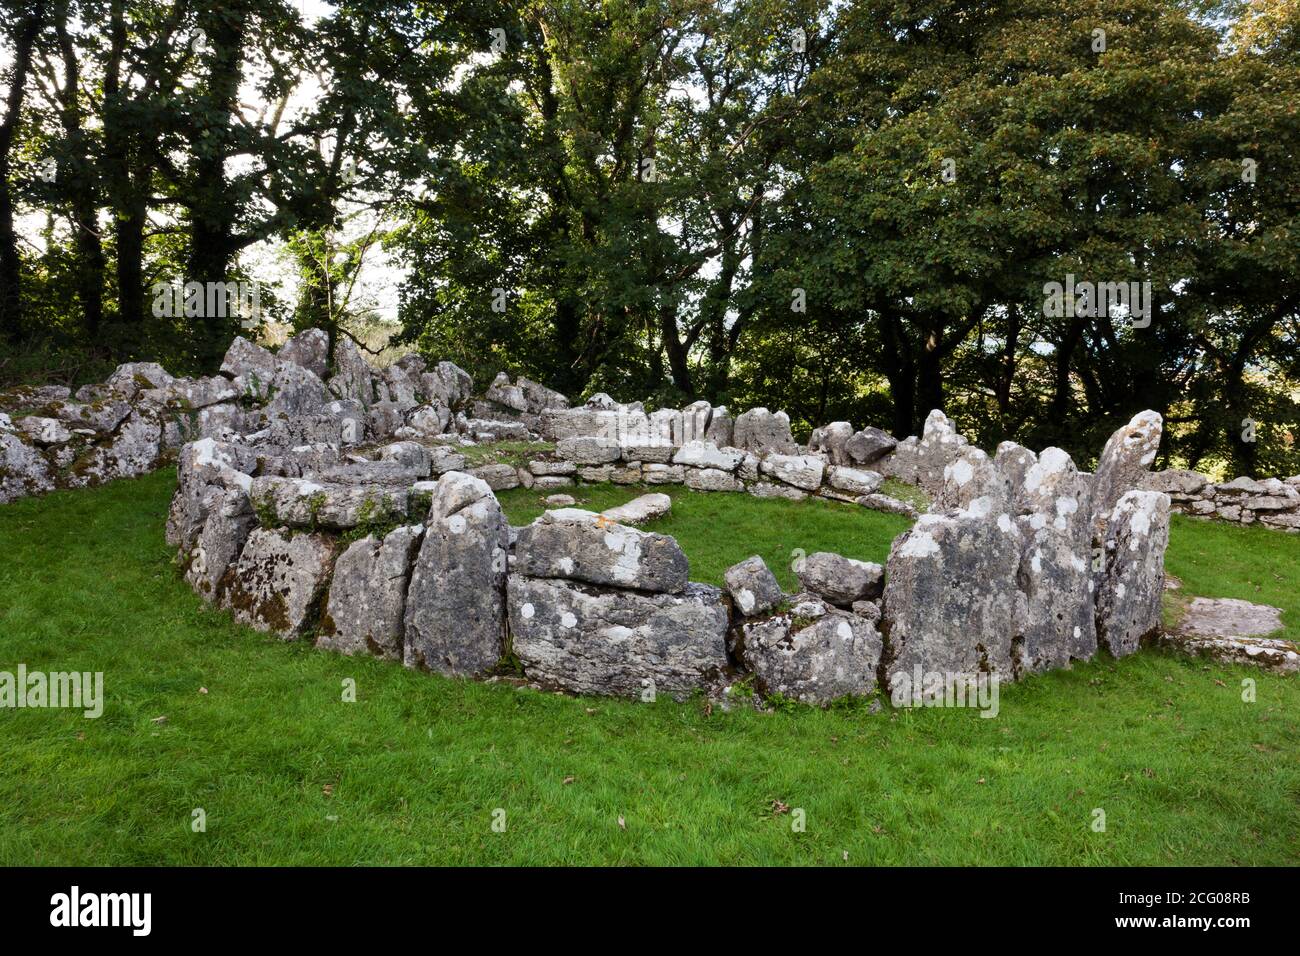 Din Lligwy is the remains of an ancient, Iron Age village near Moelfre on Anglesey, North Wales. It was still occupied during the Roman occupation. Stock Photo